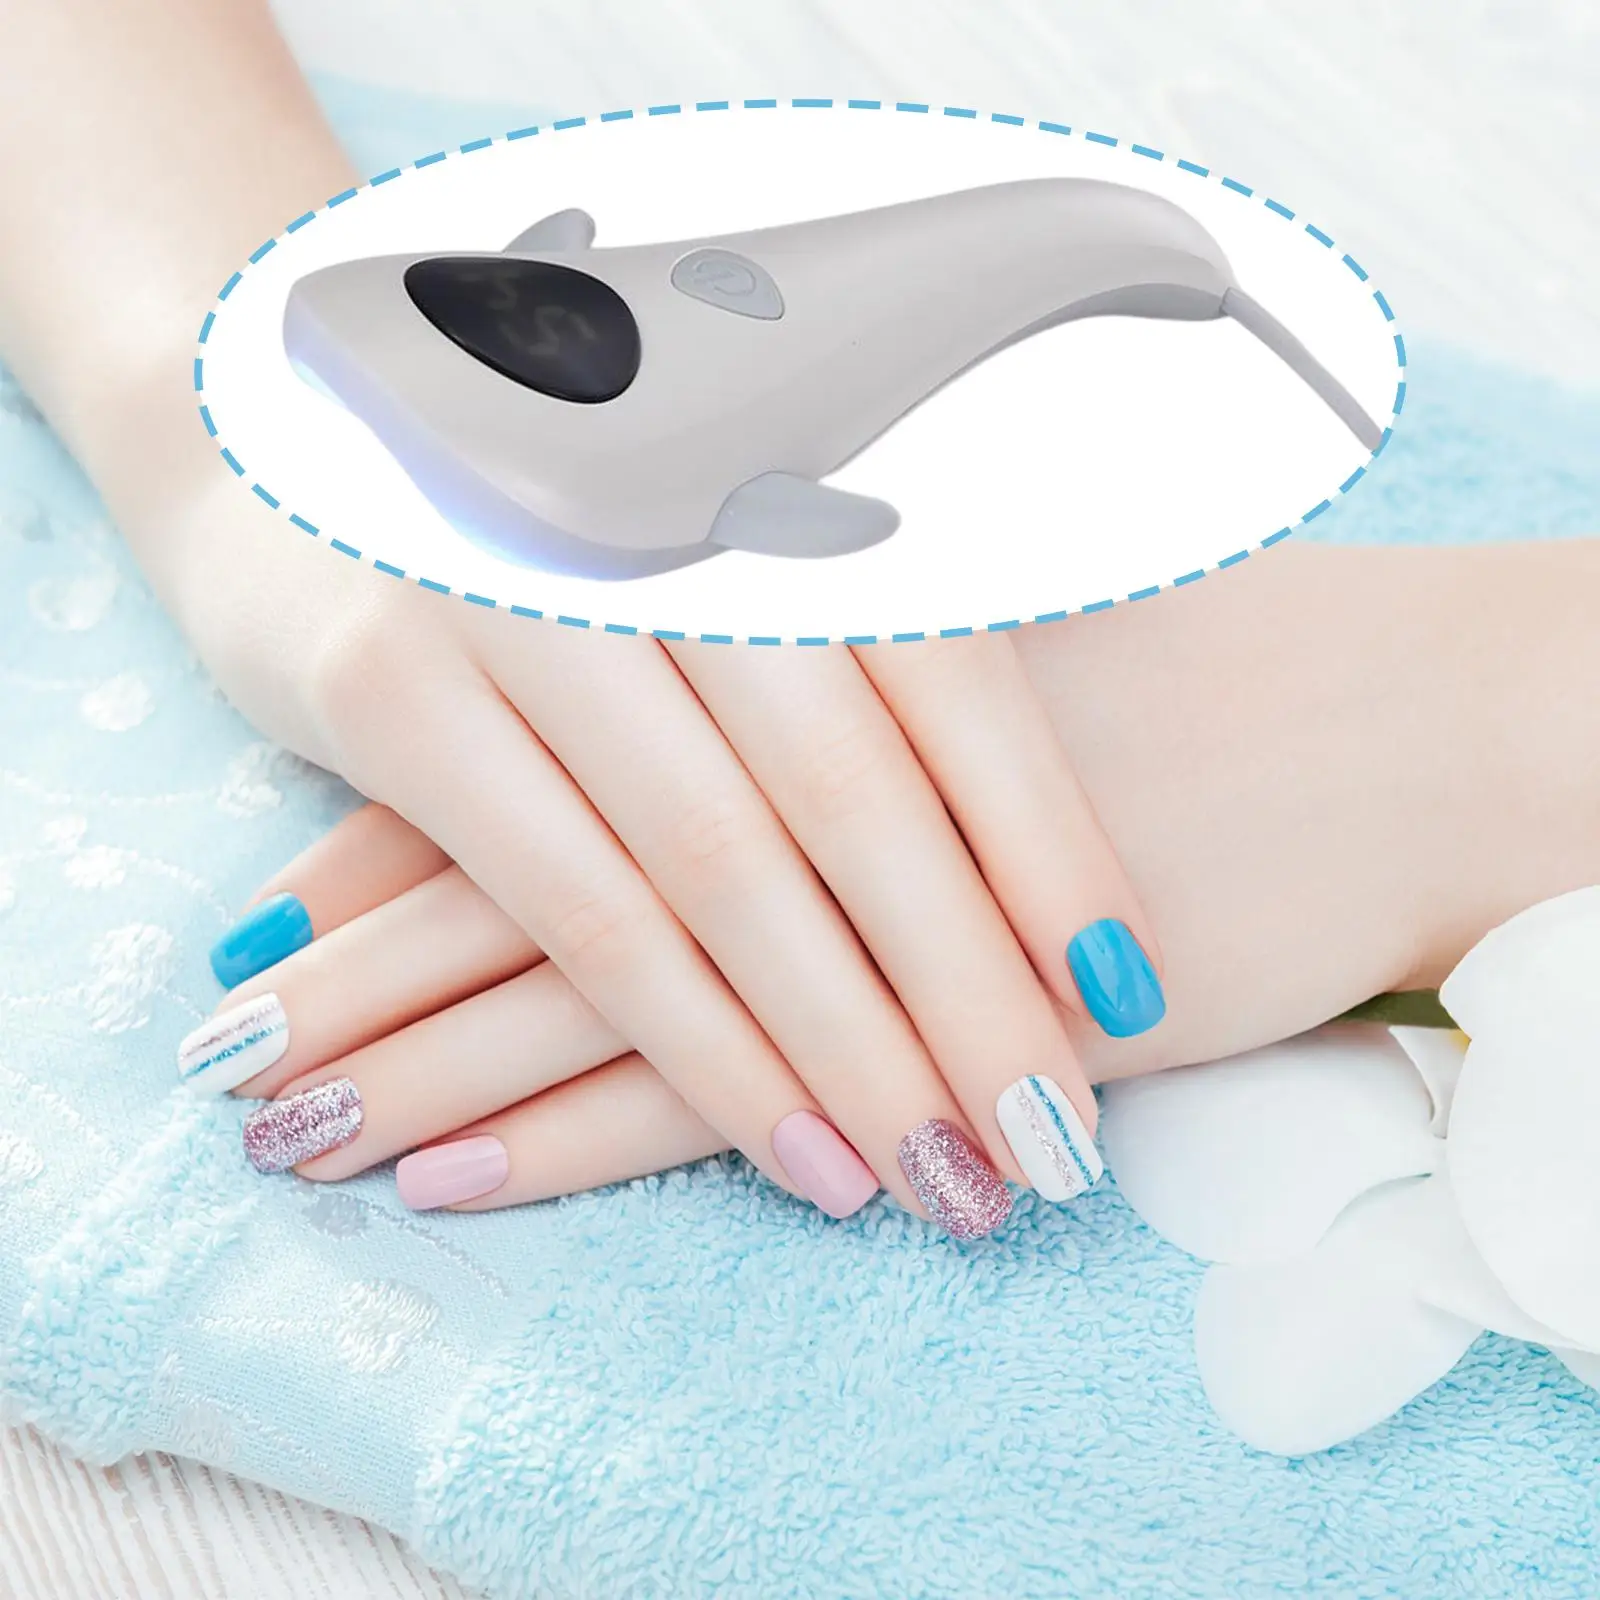 Handheld Nail Lamp with 2 Timer Setting 3 Lamp Beads Manicure Use C Salon and Home Use Digital Display 5W Gel Nail Light